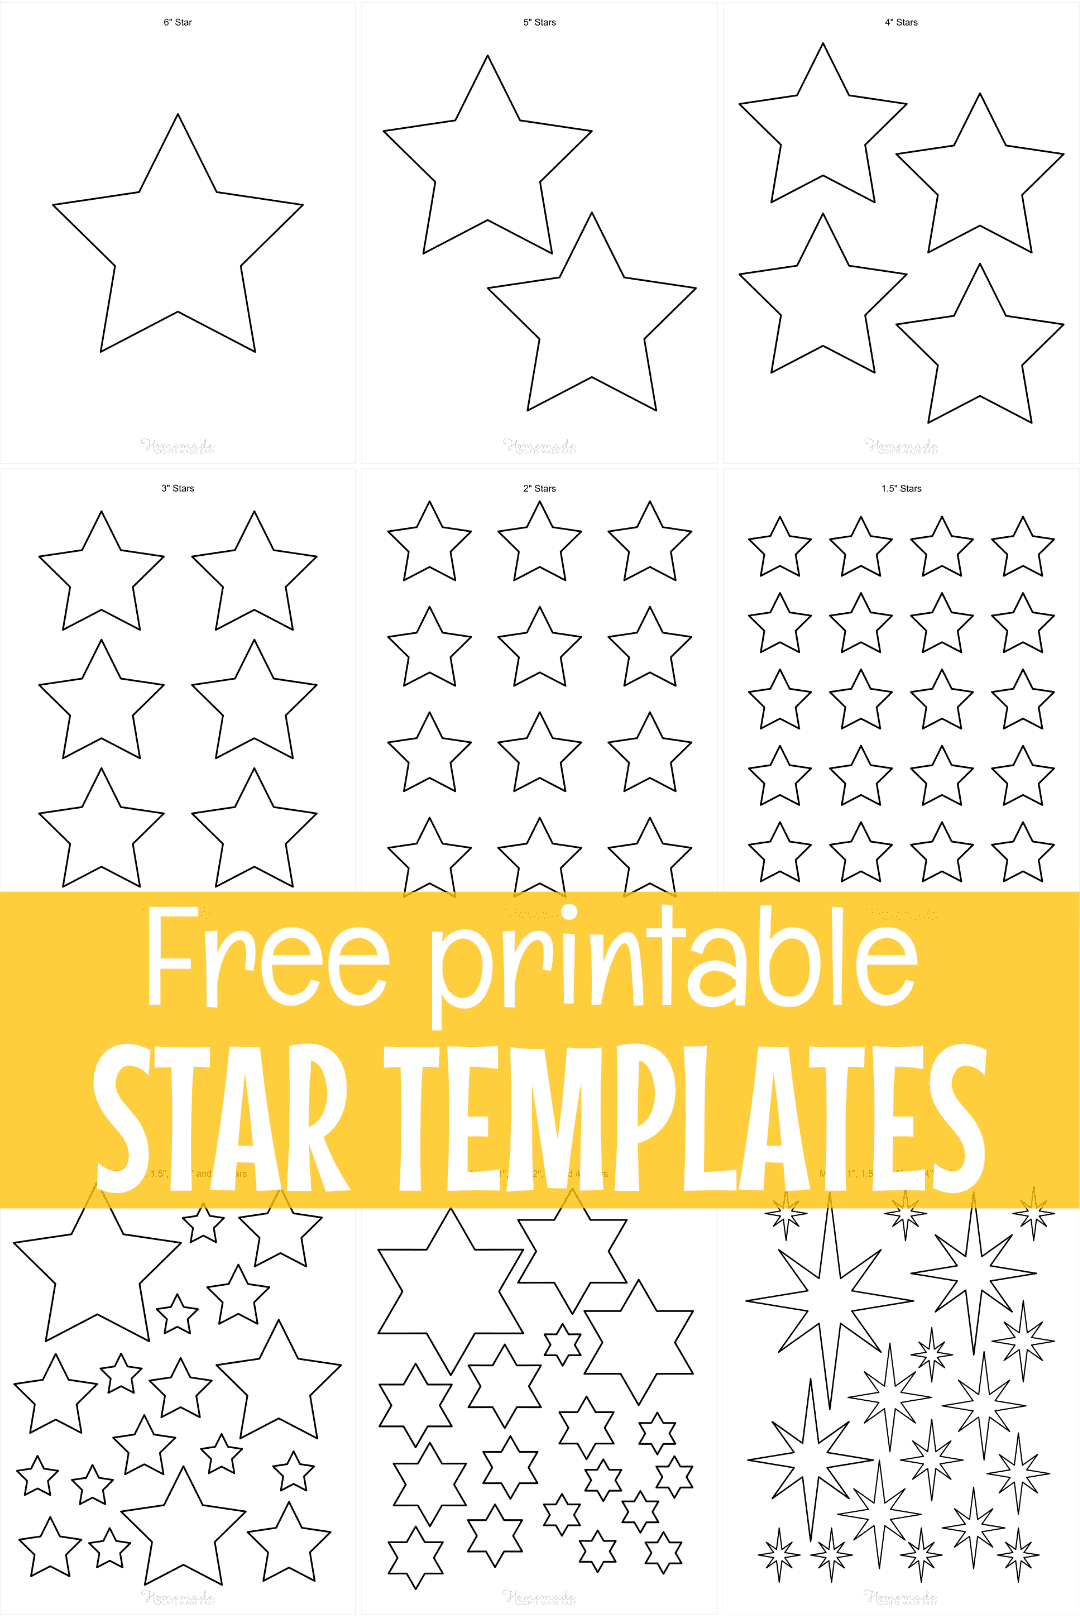 Free Printable Star Templates & Outlines Small to Large Sizes, 1 inch